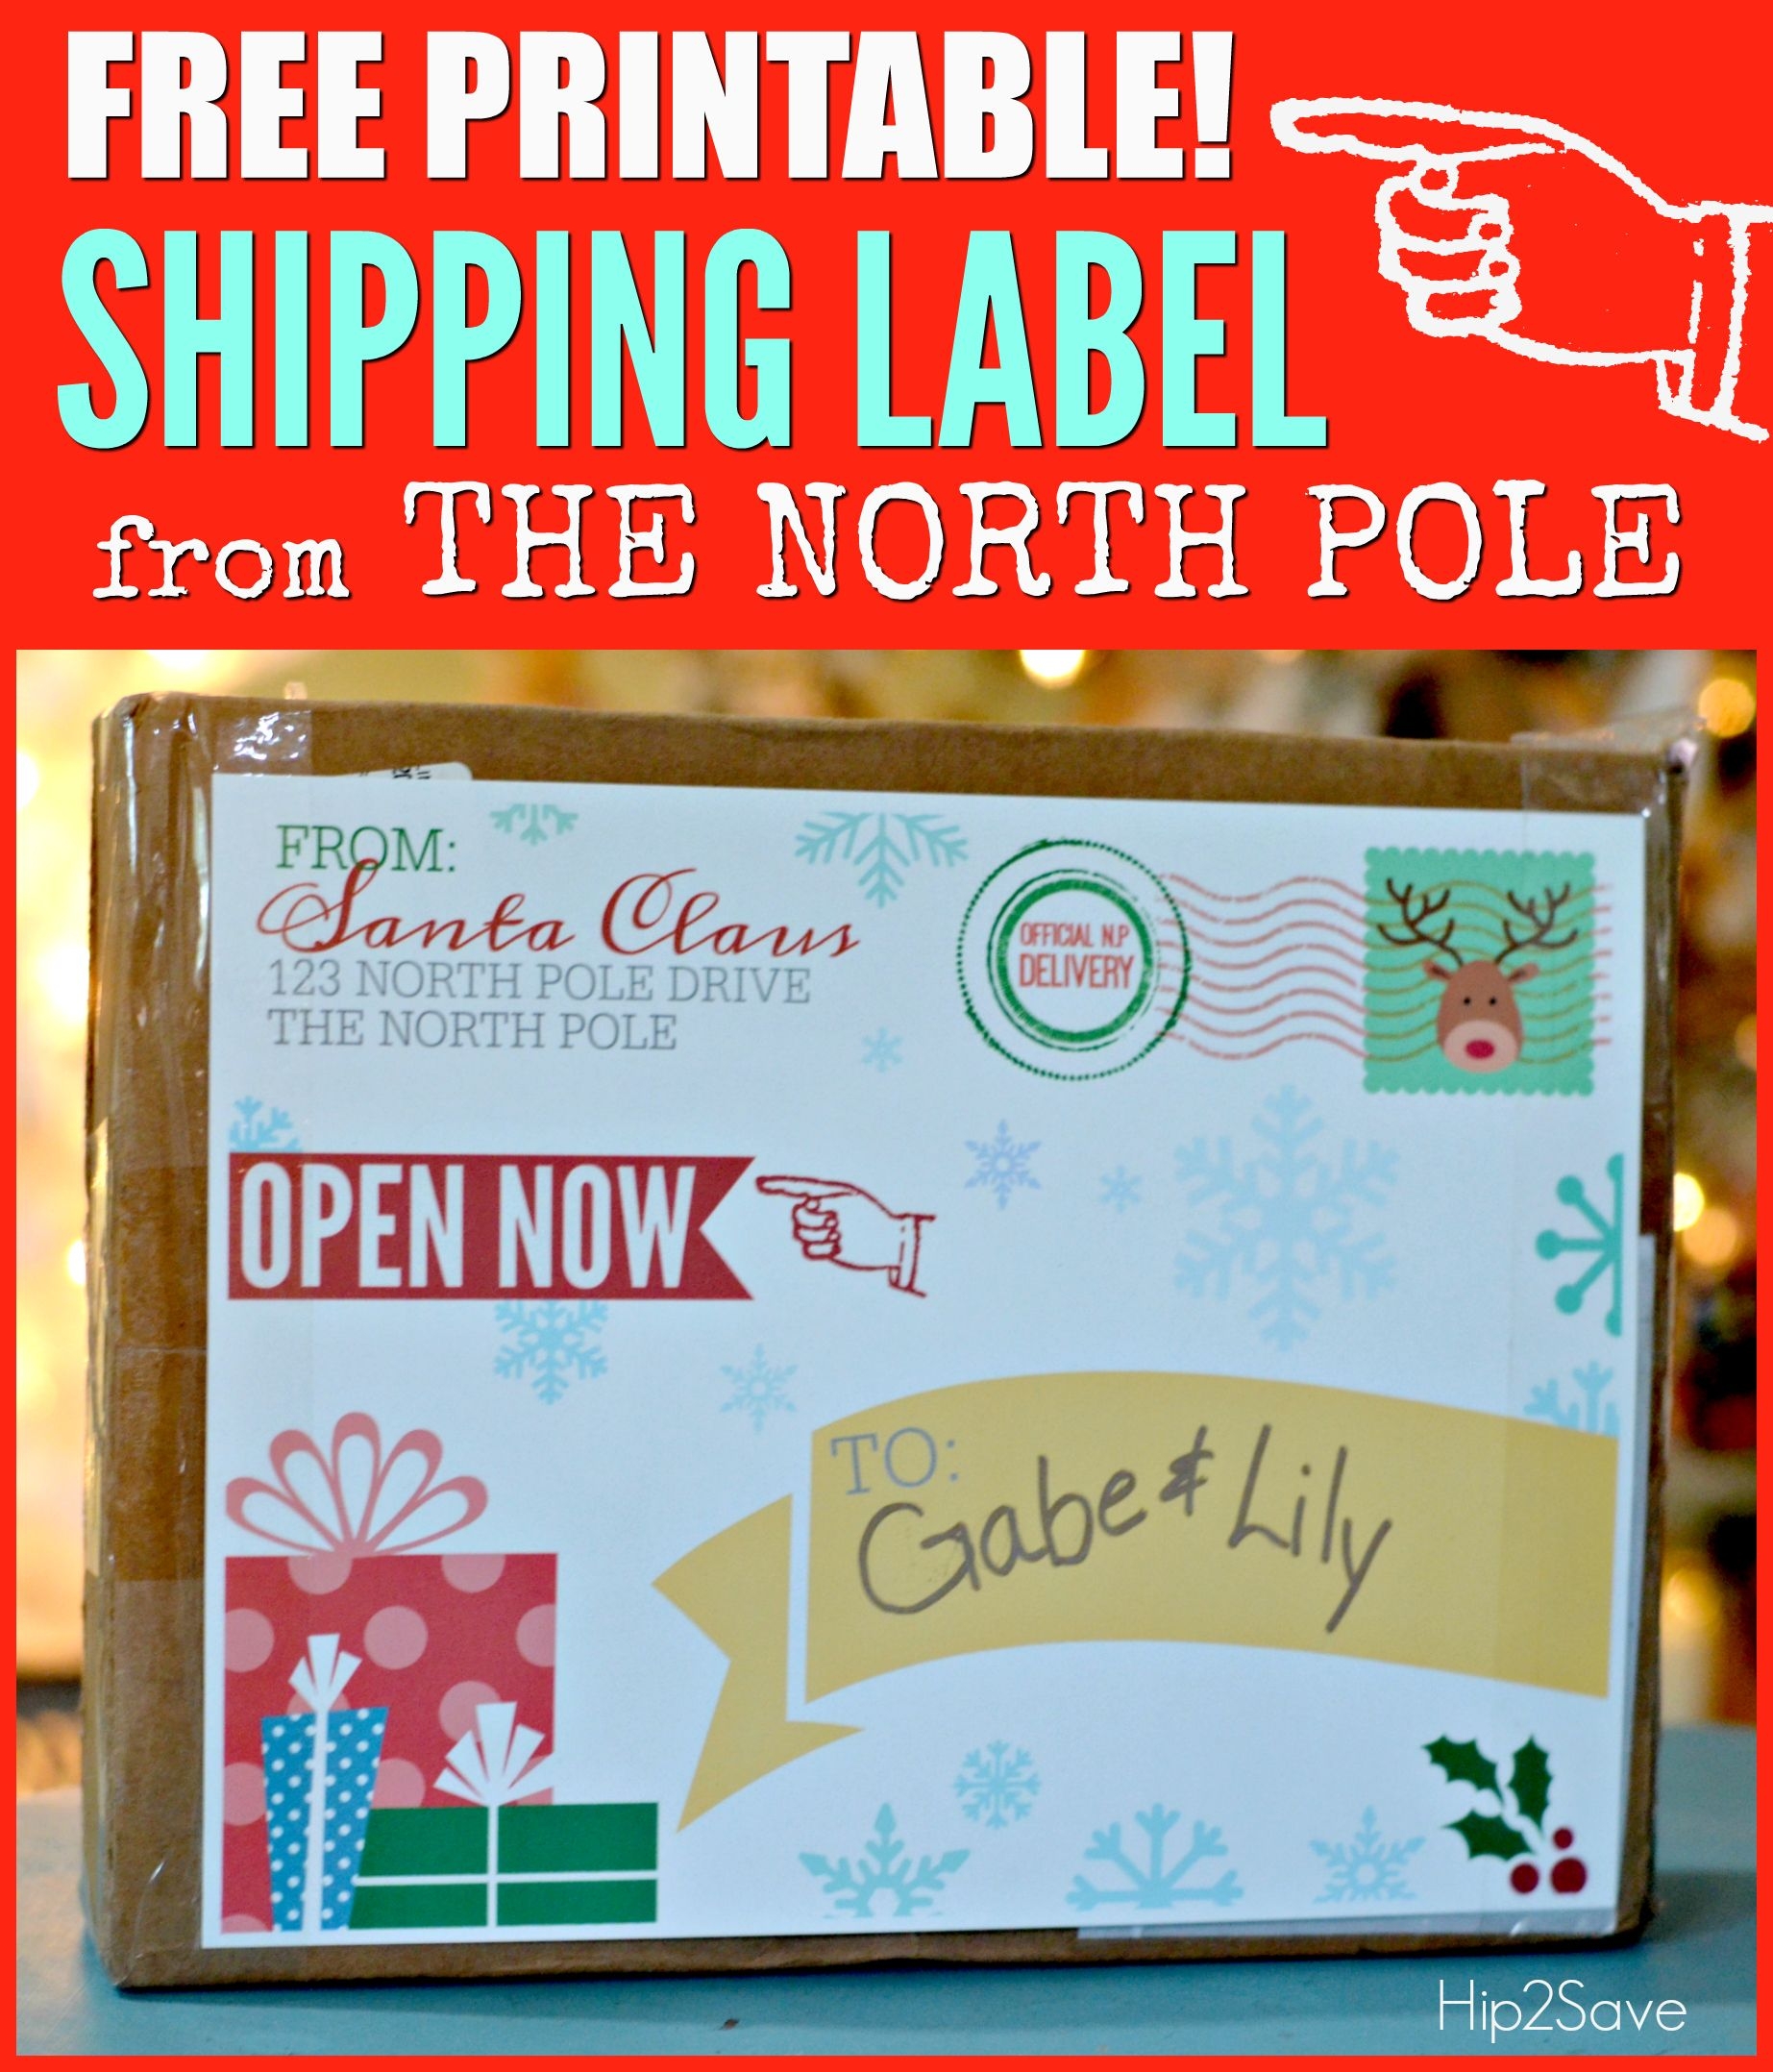 FREE Printable Shipping Label From Santa Claus Hip2Save Christmas Labels Printable Christmas Mailing Labels Labels Printables Free